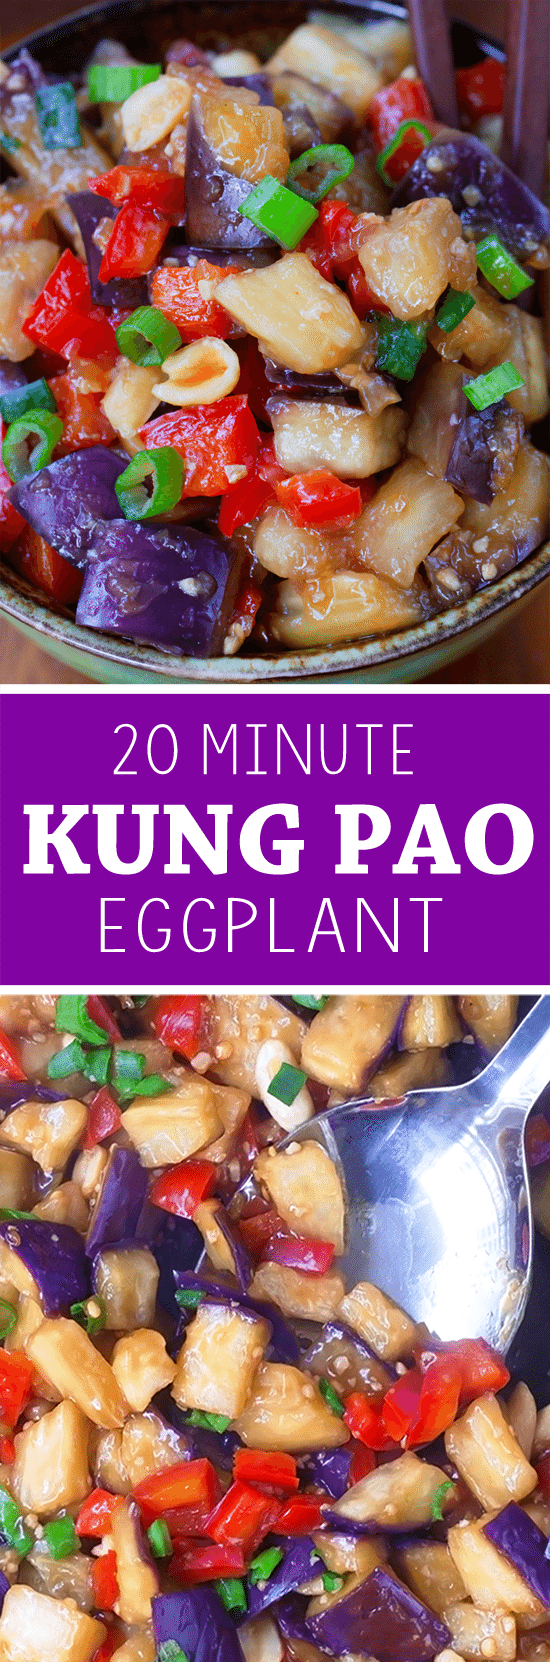 A delicious & wholesome alternative to Chinese takeout, without all the extra fat and calories!